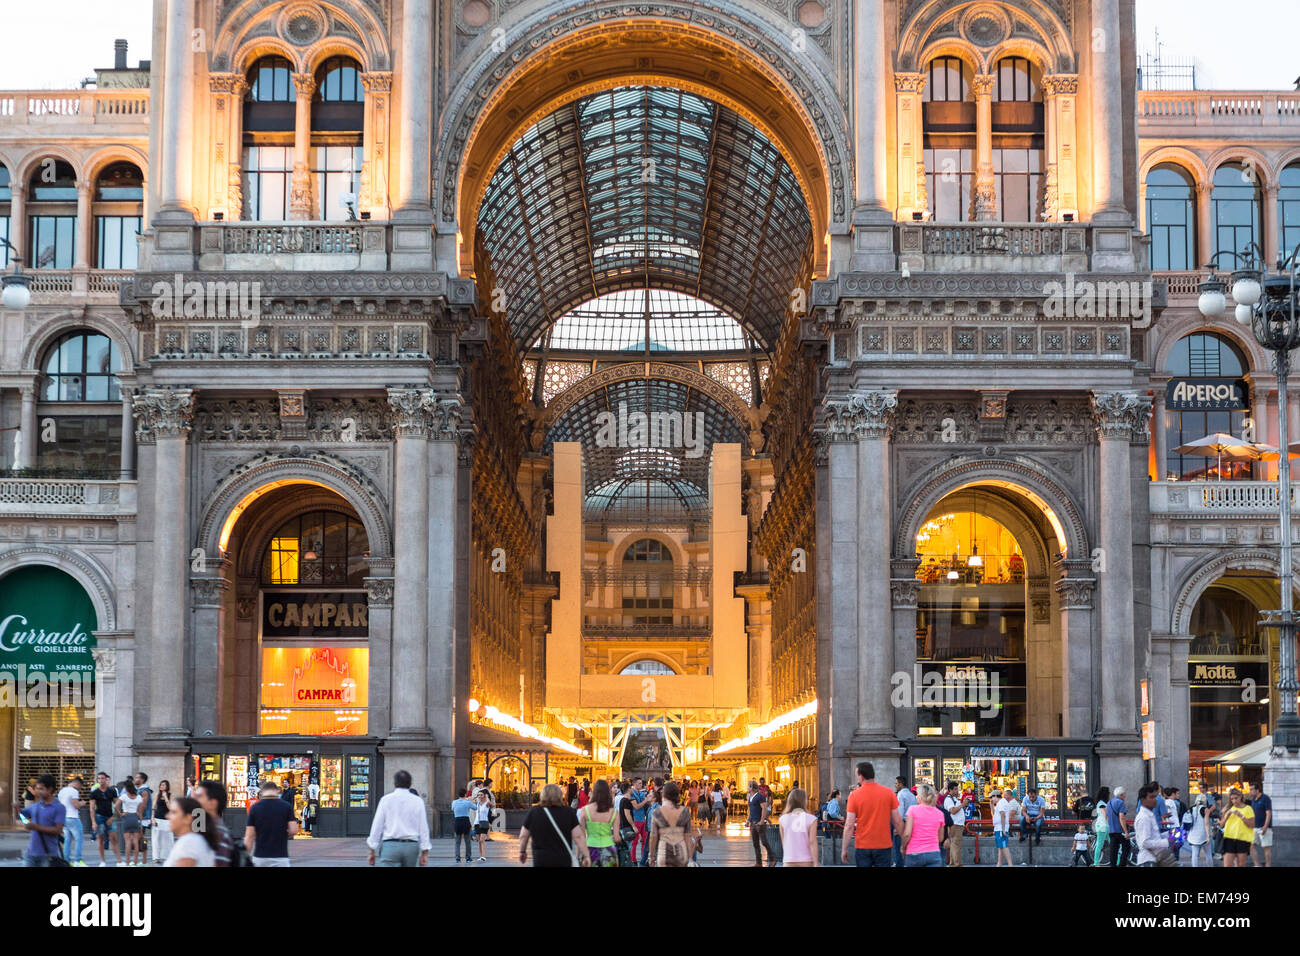 Outside exterior view of Galleria Vittorio Emanuele II at dusk in Milan, Italy Stock Photo